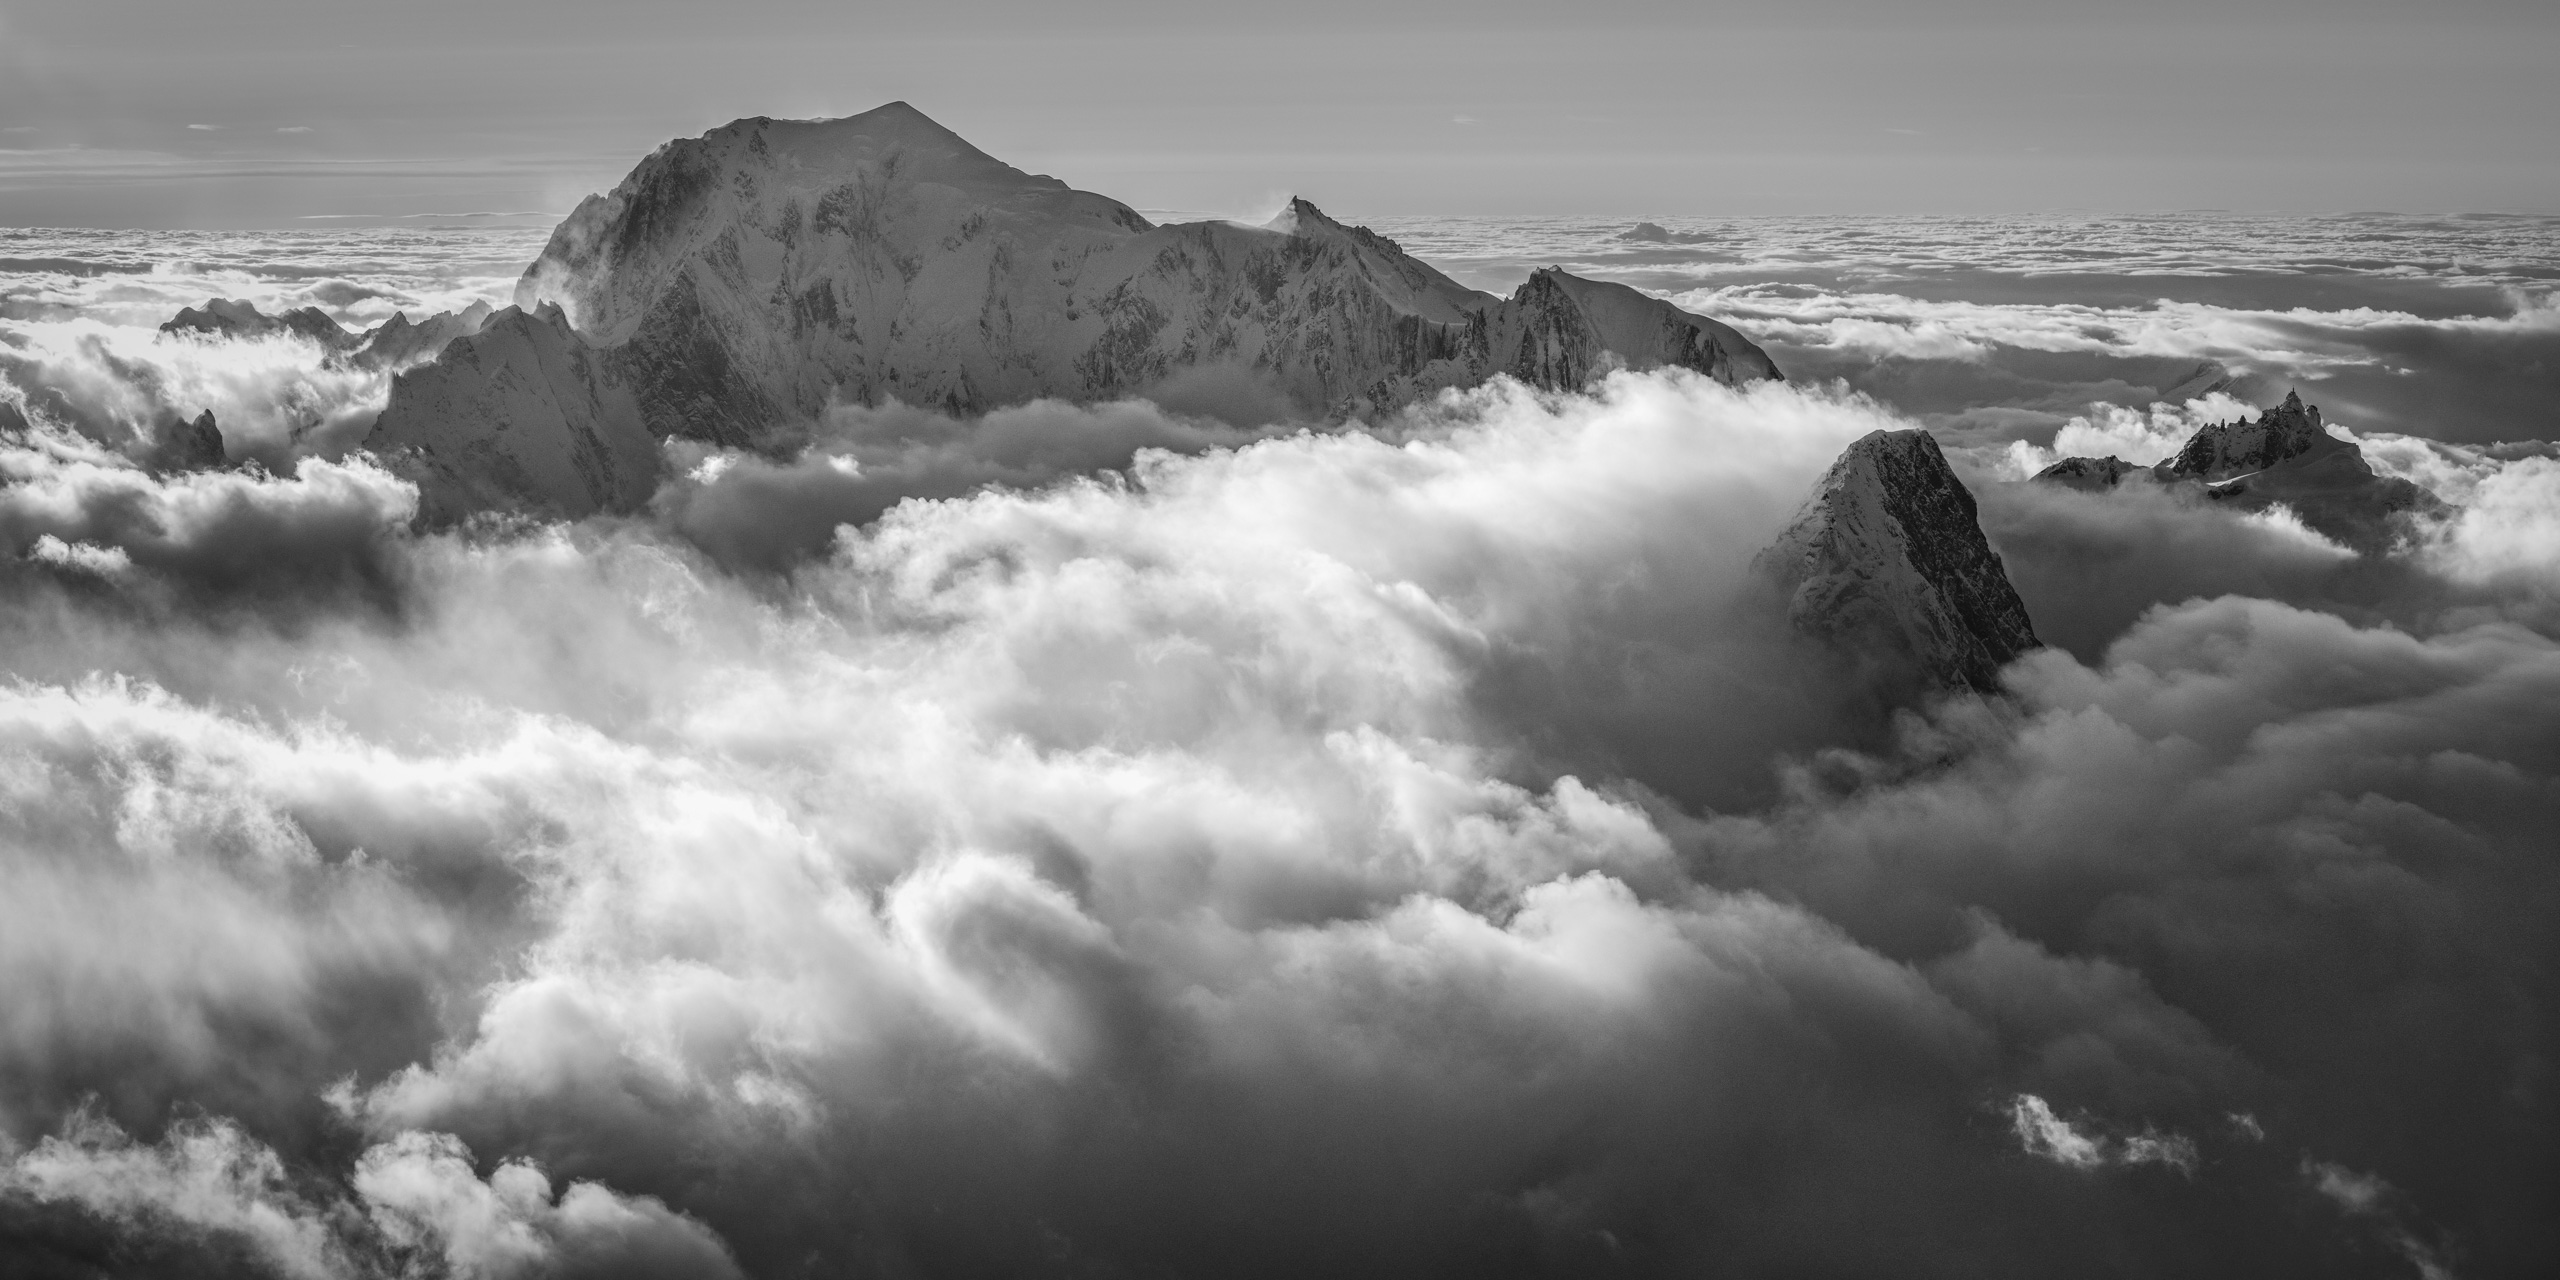 Mont blanc aiguille du midi panorama  in a sea of clouds - Grandes Jorasses Photo 